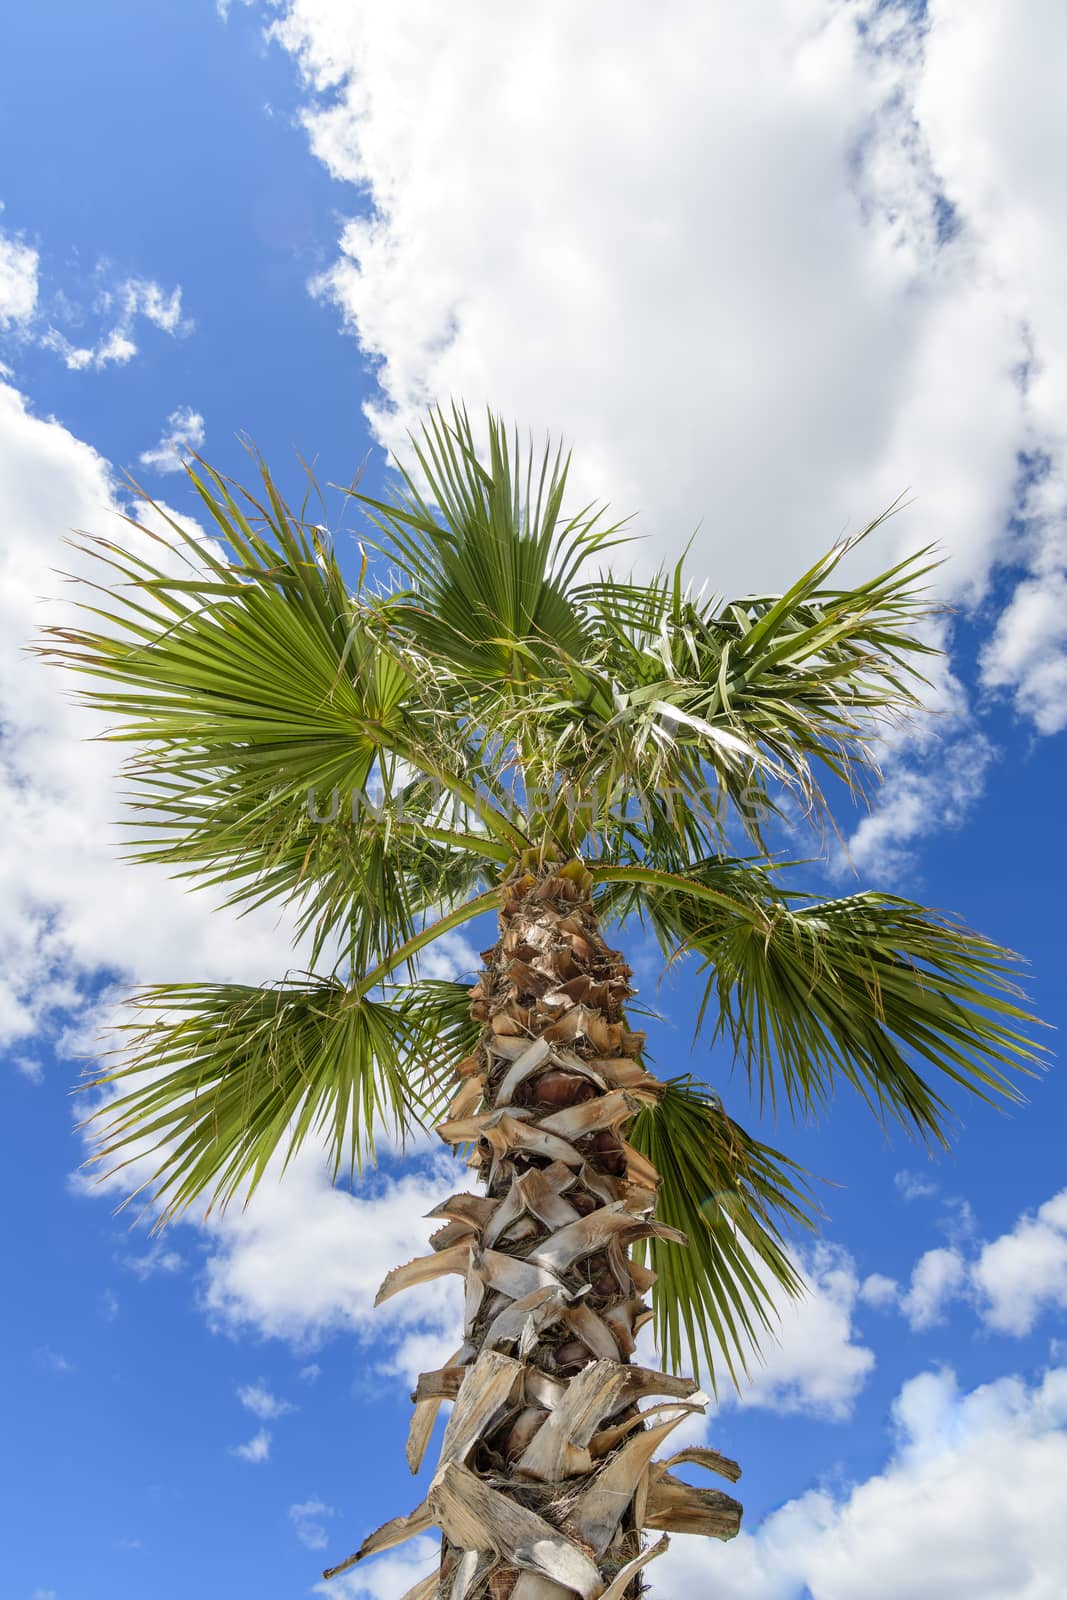 Palm tree against blue sky with white clouds in bright sunlight